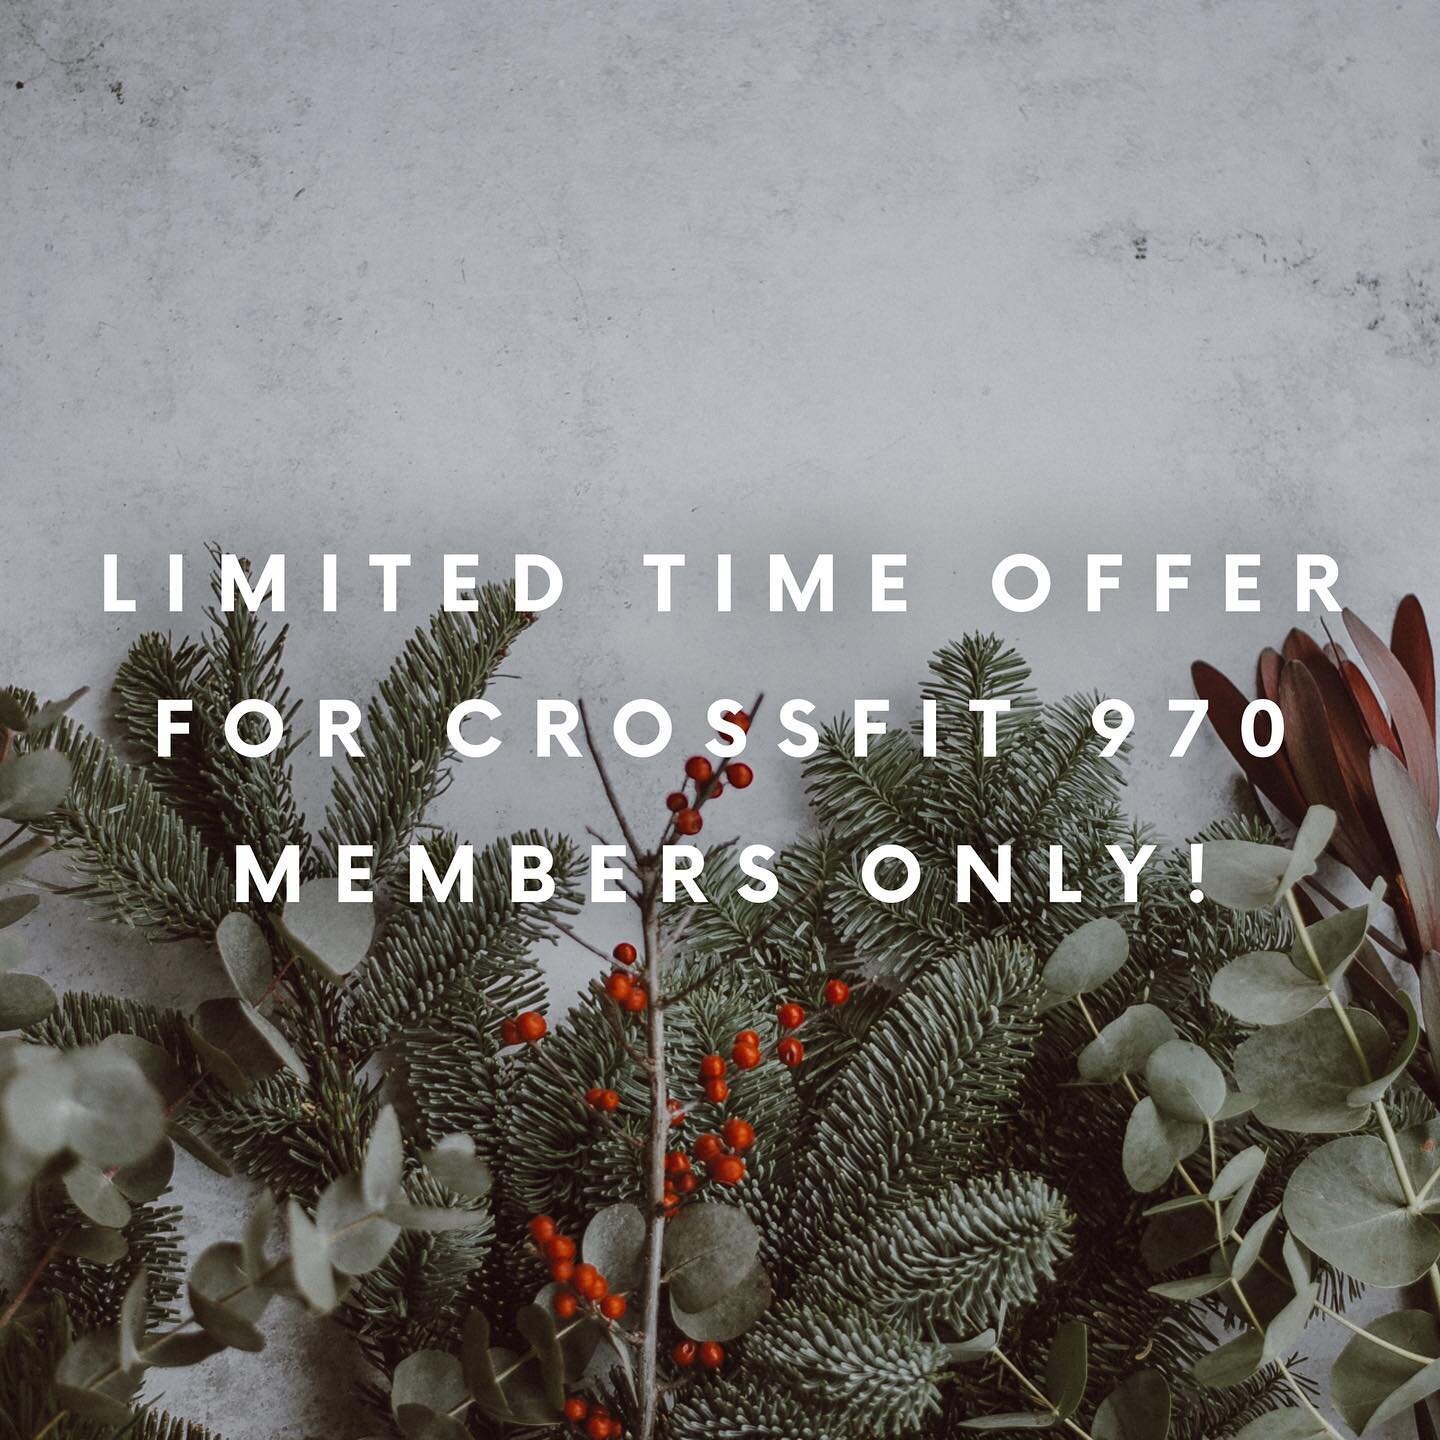 🔔 Attention @crossfit_970 members ‼️ 

In honor of officially starting my own coaching business I&rsquo;m offering a limited time promo for 970 members ONLY!

From Dec 1 to Feb 1 I will be offering nutrition coaching for $175/month! After Feb 1st pr